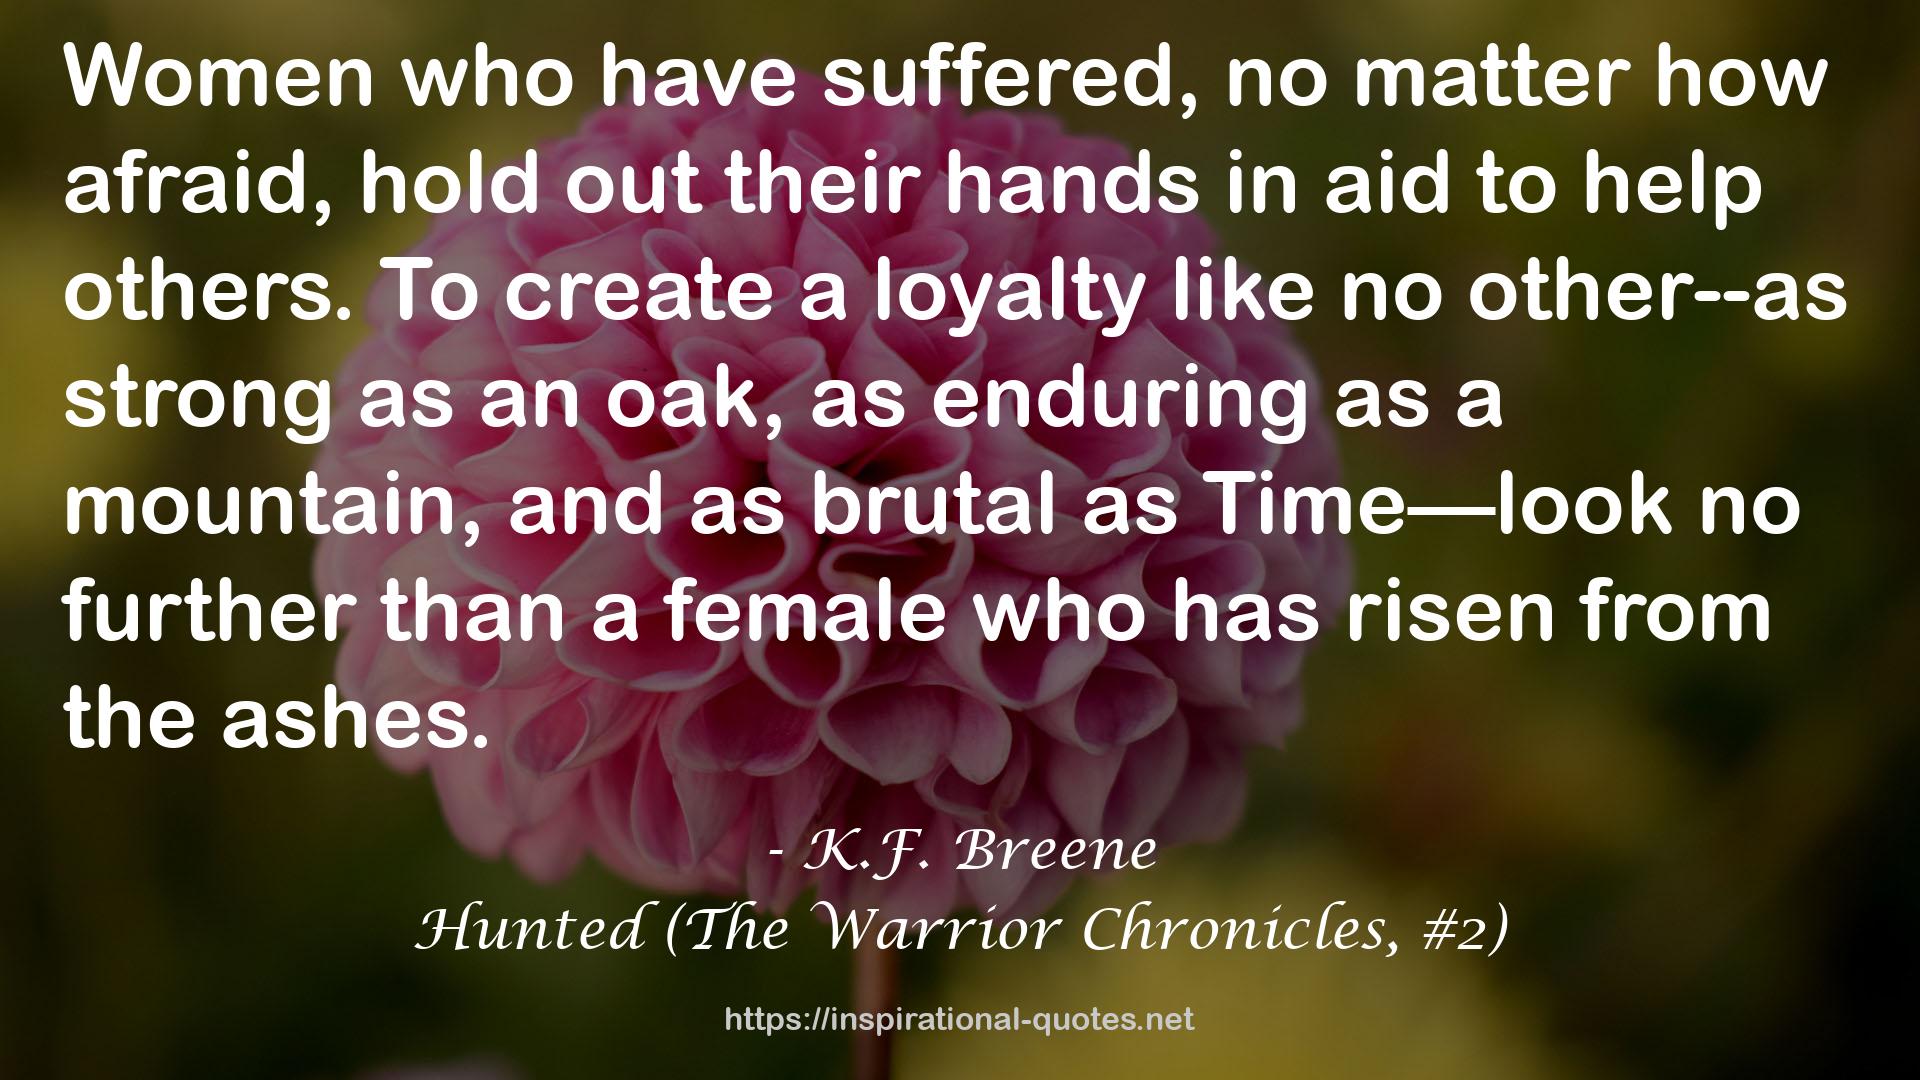 Hunted (The Warrior Chronicles, #2) QUOTES